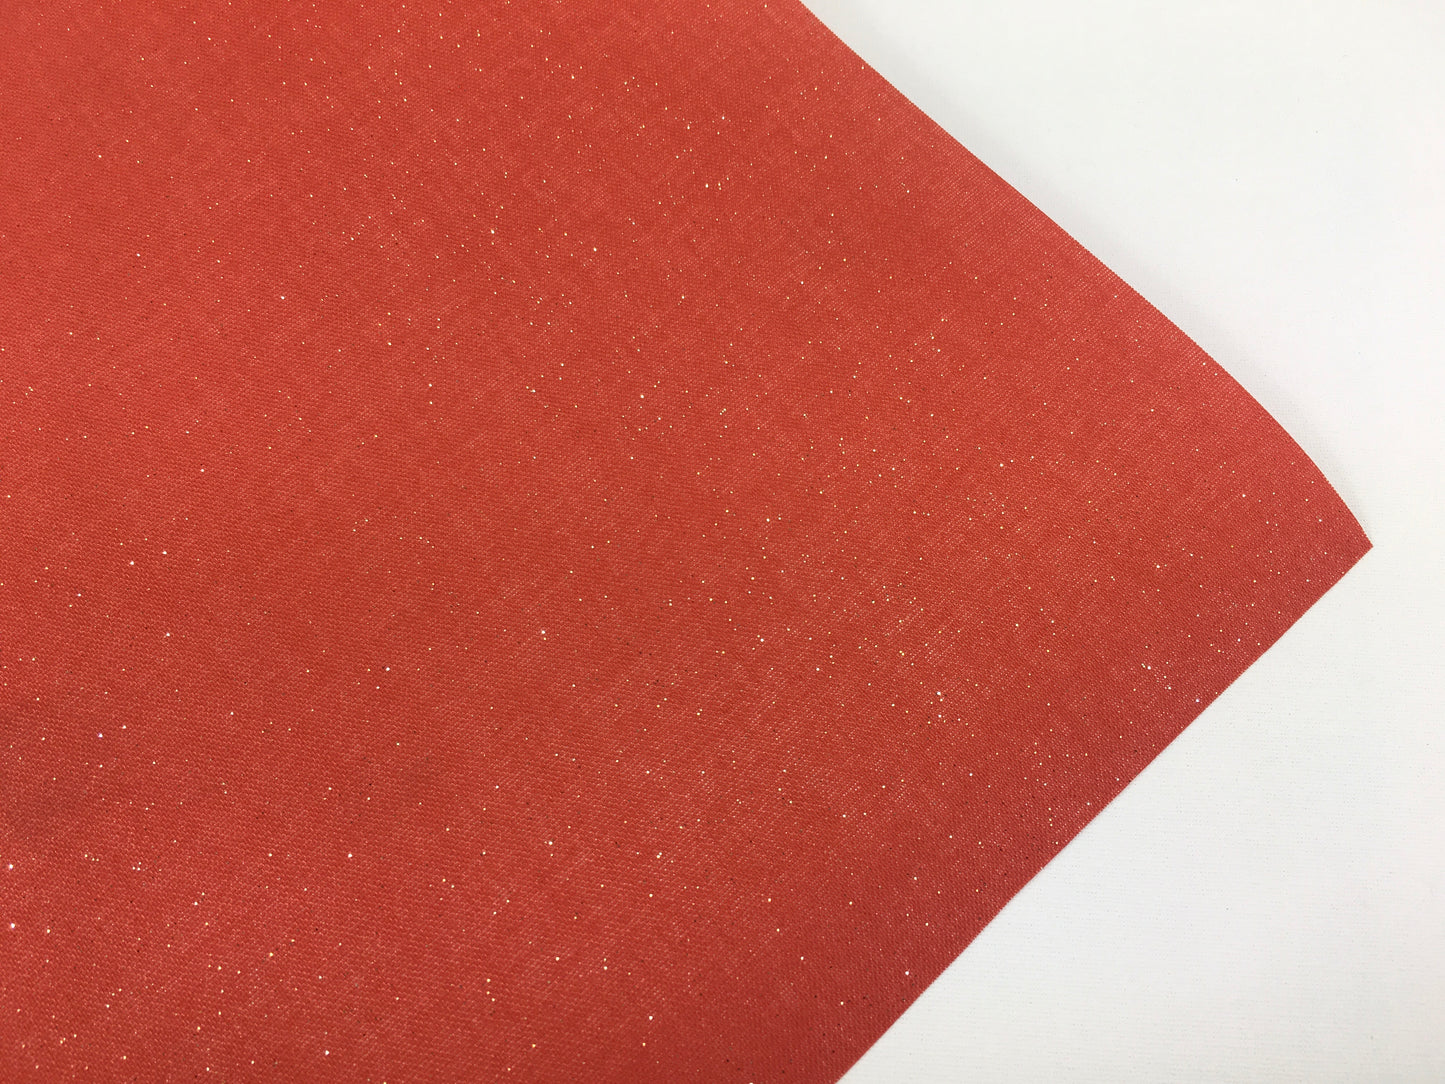 Sparkling Buckram- Durable bookbinding cloth with paper backing- TBBSP3- Sparkle Tuscan Red